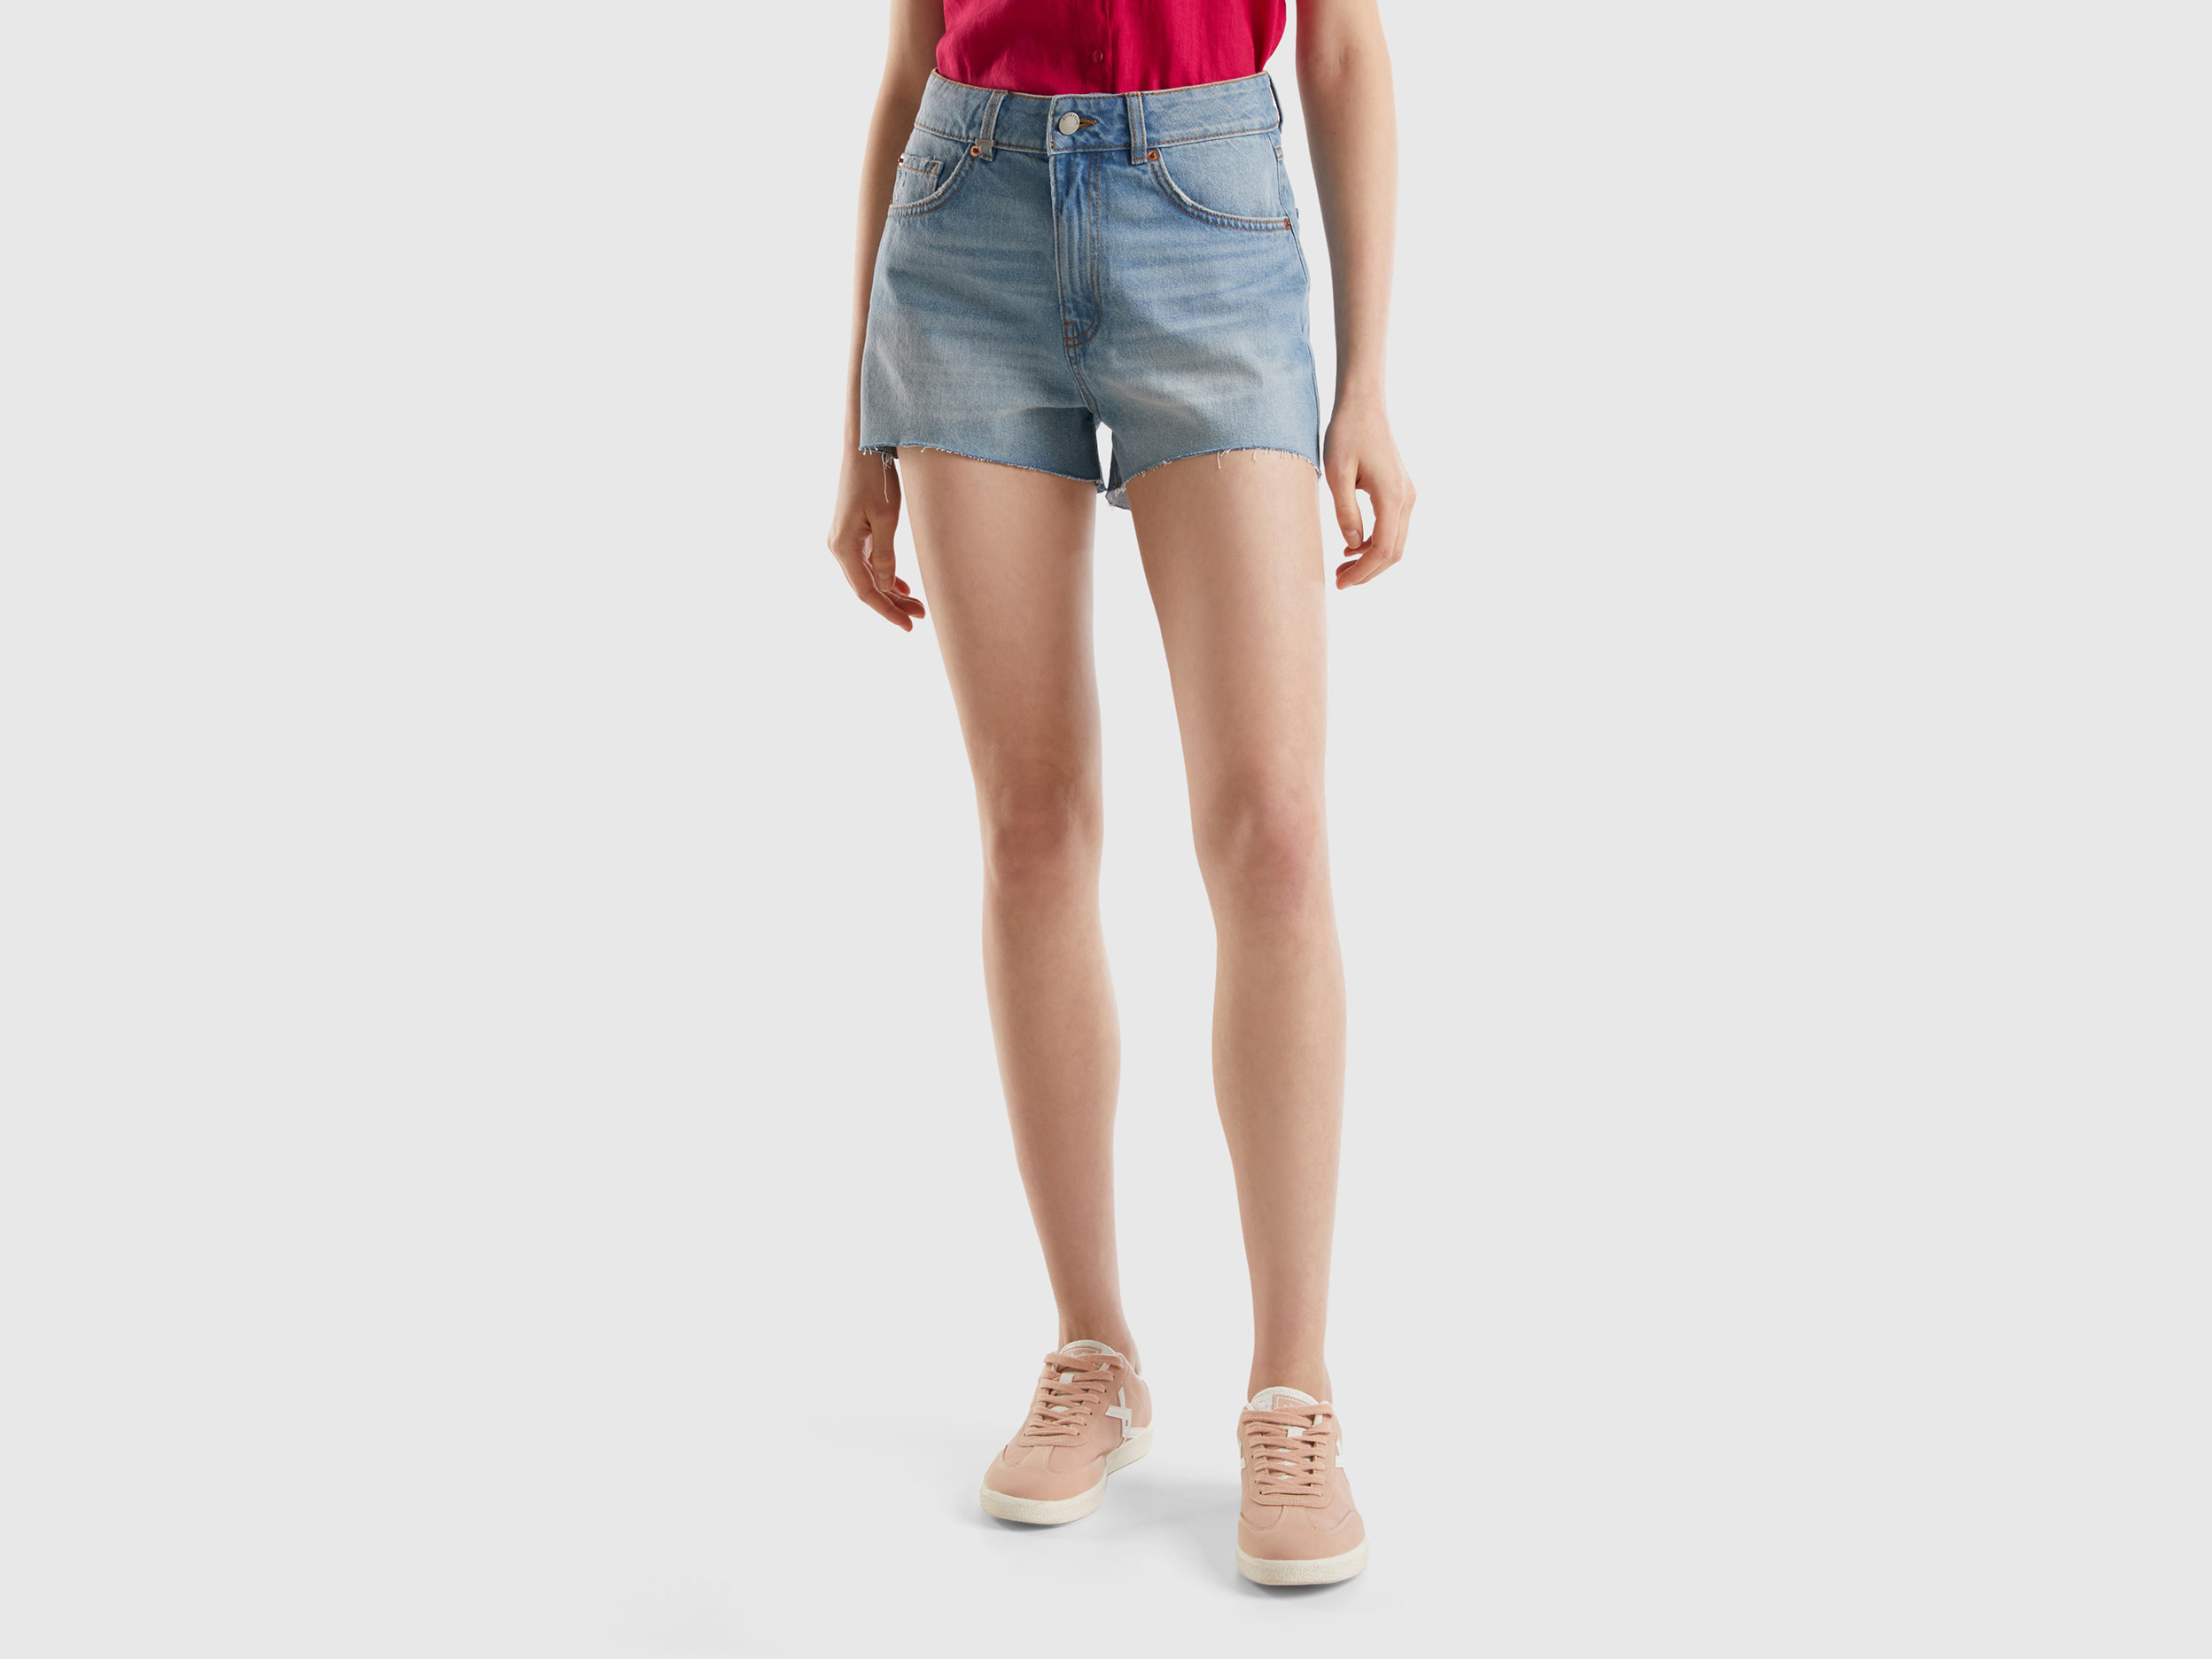 Image of Benetton, Frayed Shorts In Recycled Cotton Blend, size 30, Light Blue, Women